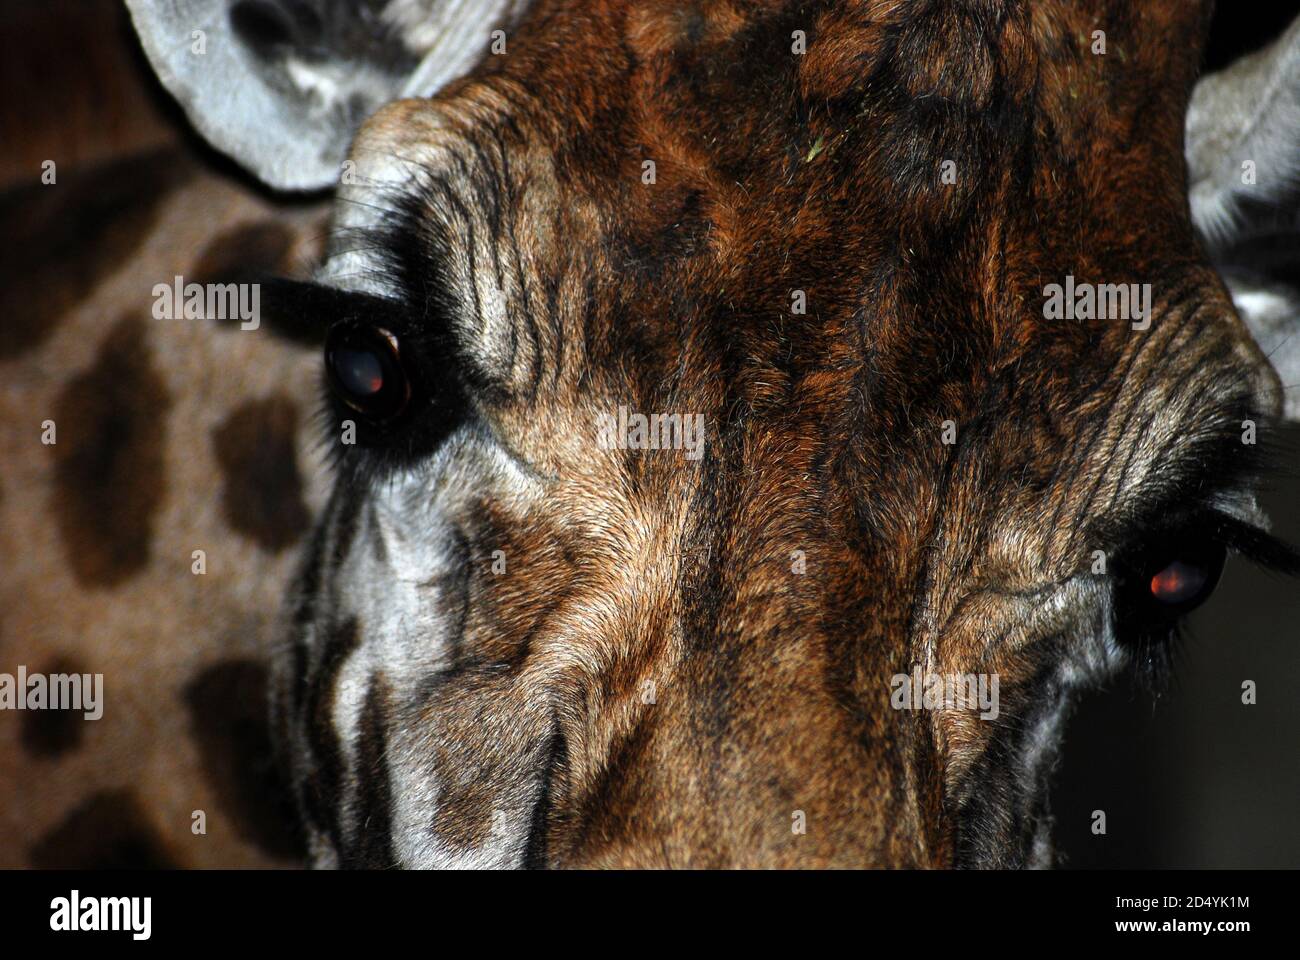 Photograph Giraffe (Giraffa) close-up of the head and eyes, of this African mammal, well known for its spotted coat, long neck, legs, and great height Stock Photo